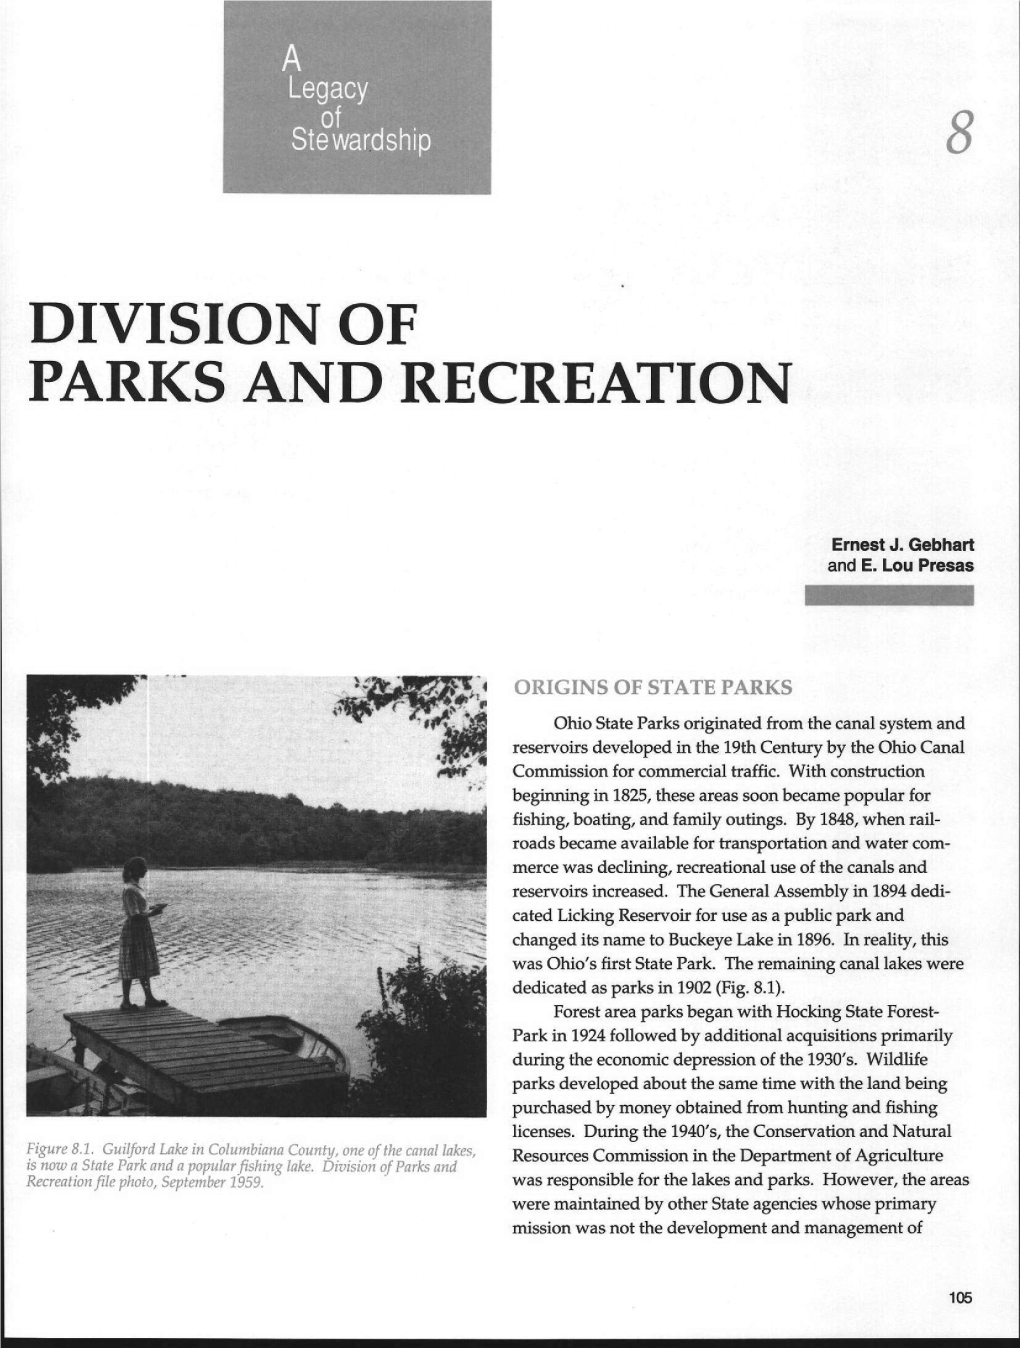 Division of Parks and Recreation for Expenditures